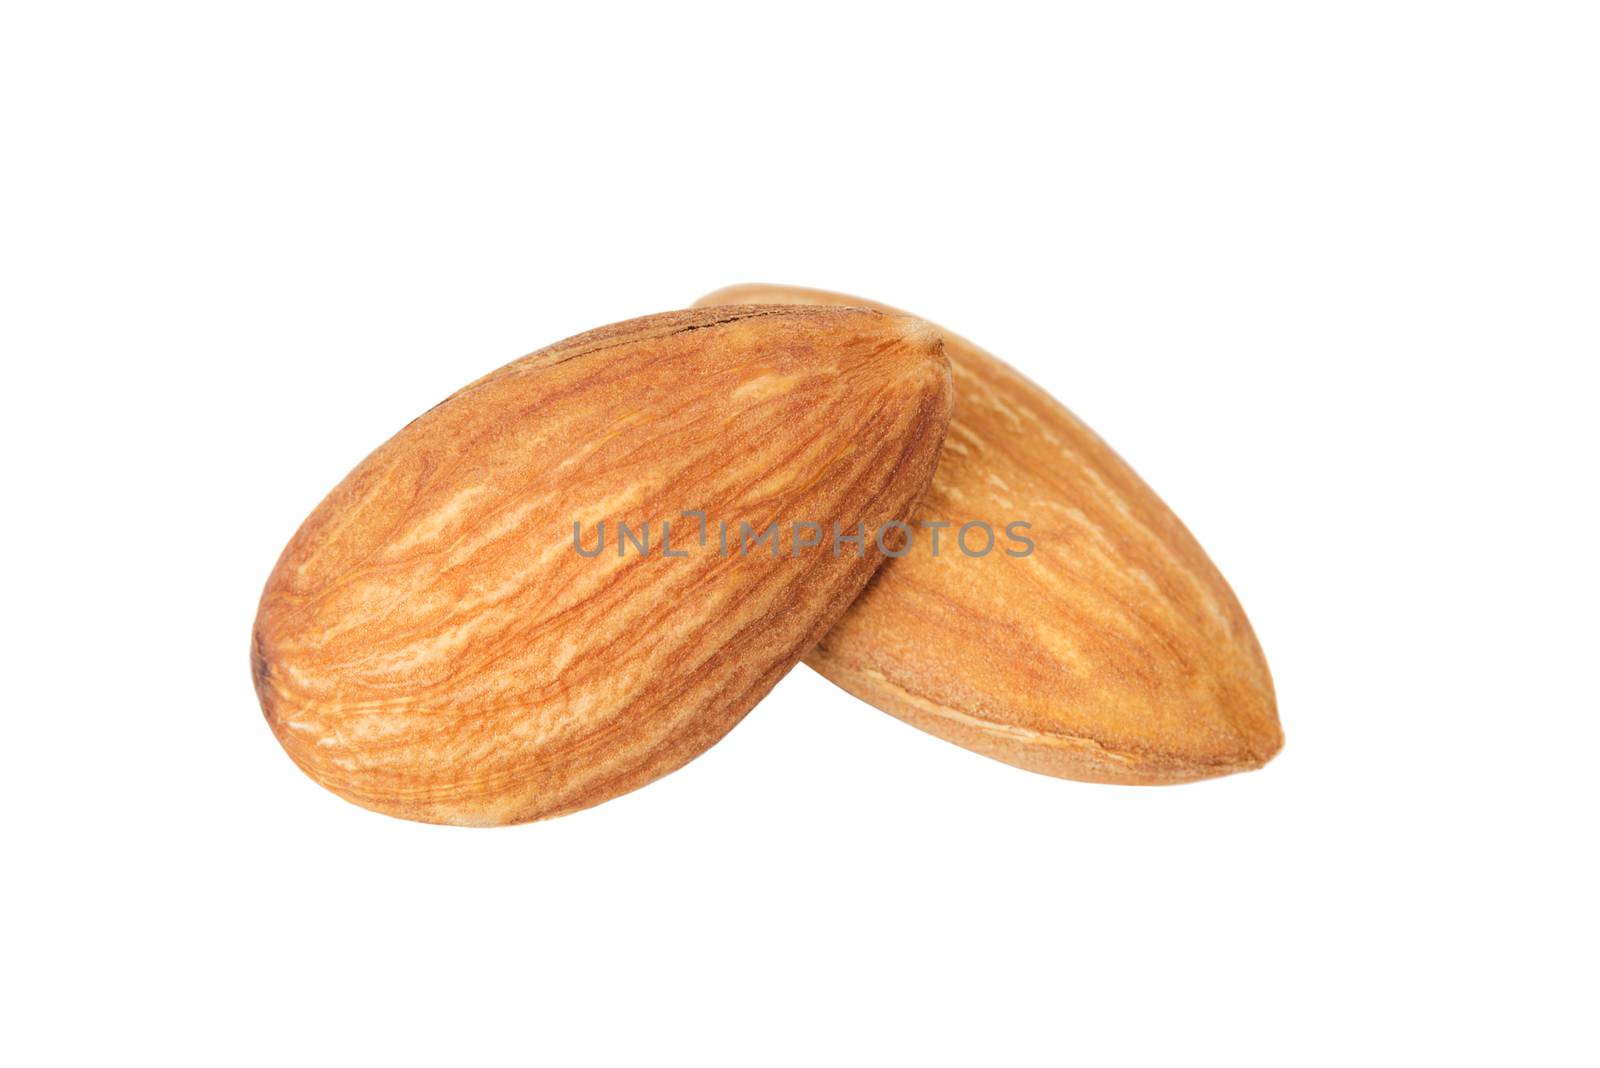 Two raw almonds isolated on a white background